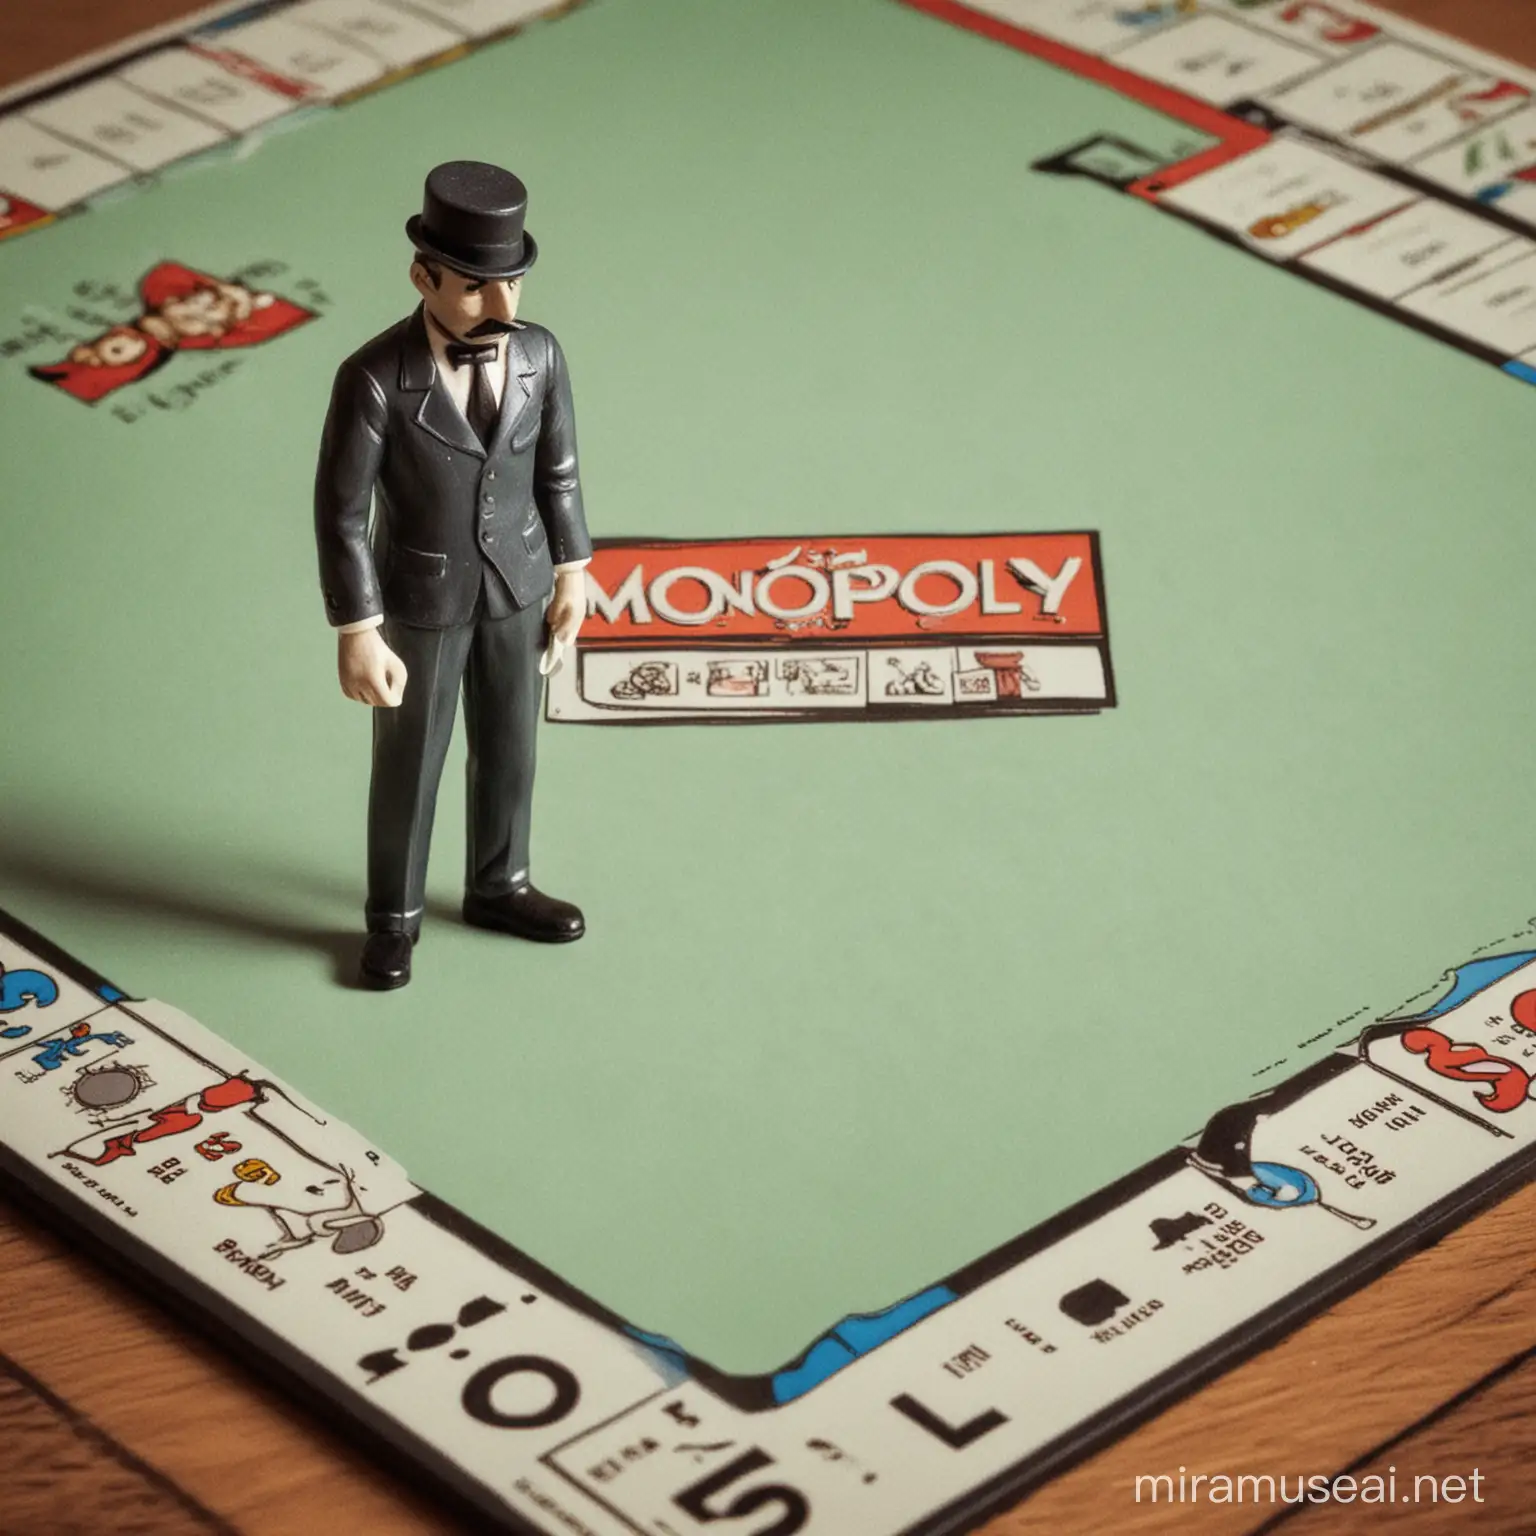 Lonely Monopoly Player Reflecting on Defeat